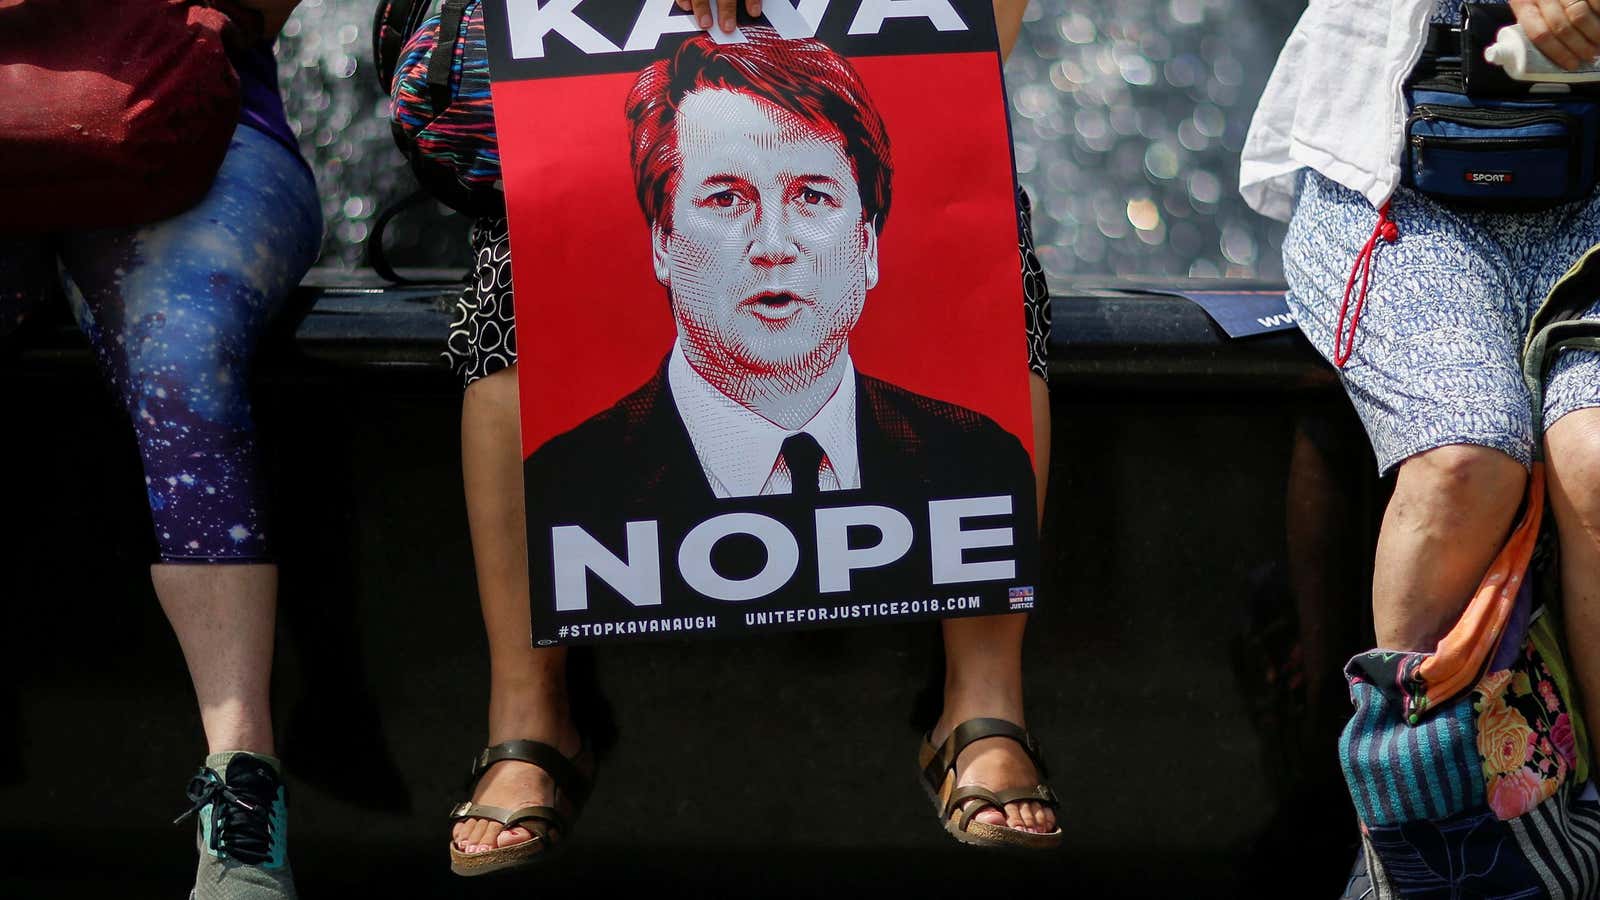 Could the discussion around Supreme Court nominee Brett Kavanaugh spark a #metoo movement in high schools?